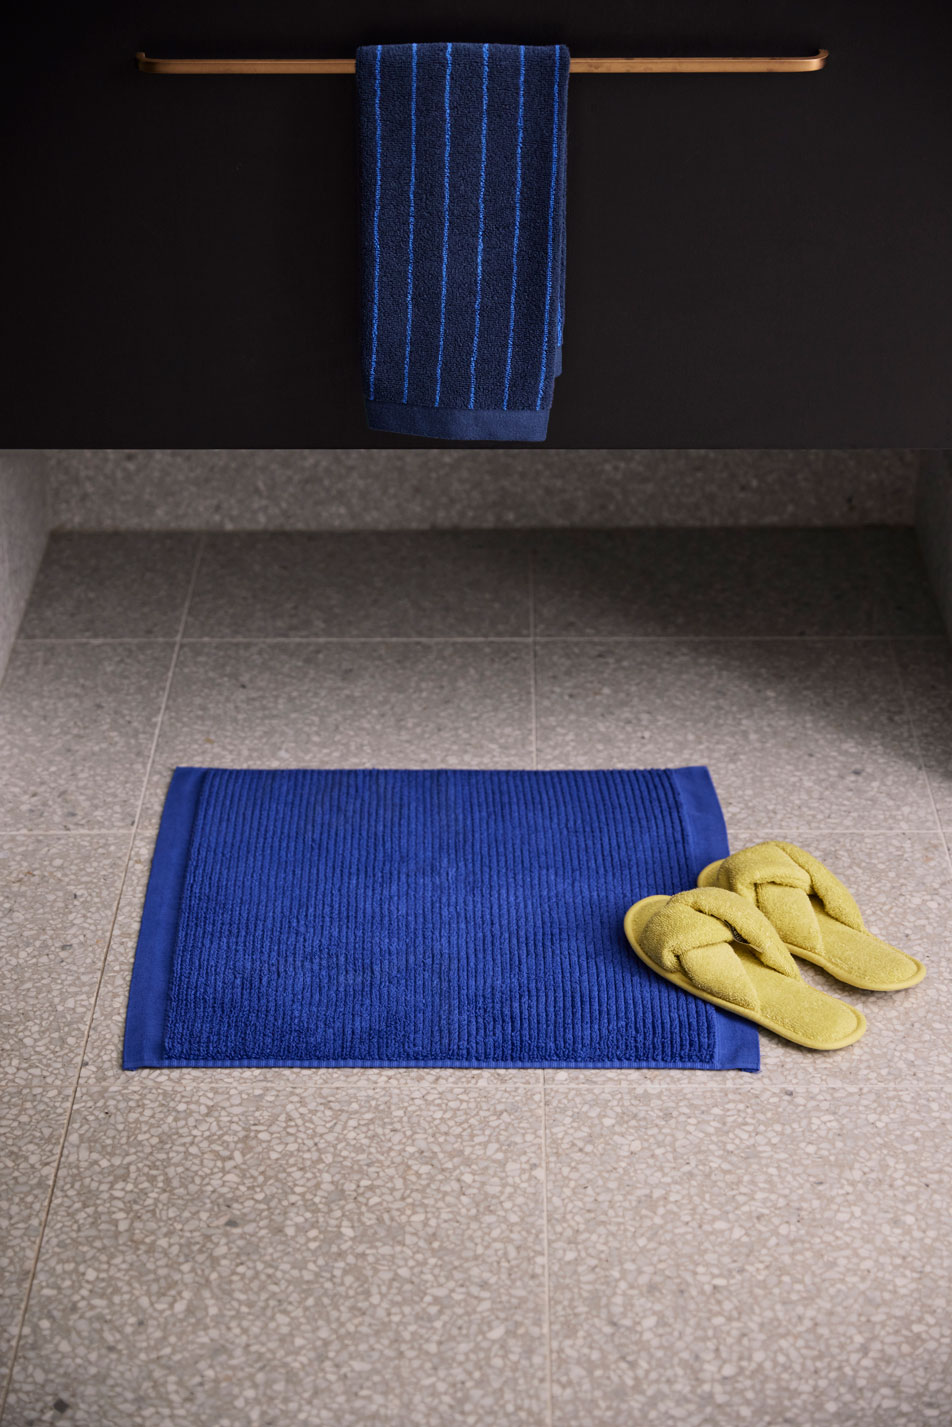 A small blue bath mat with a pair of yellow slippers sits underneath a black vanity with gold hardware and a matching blue hand towel draped over the rail.